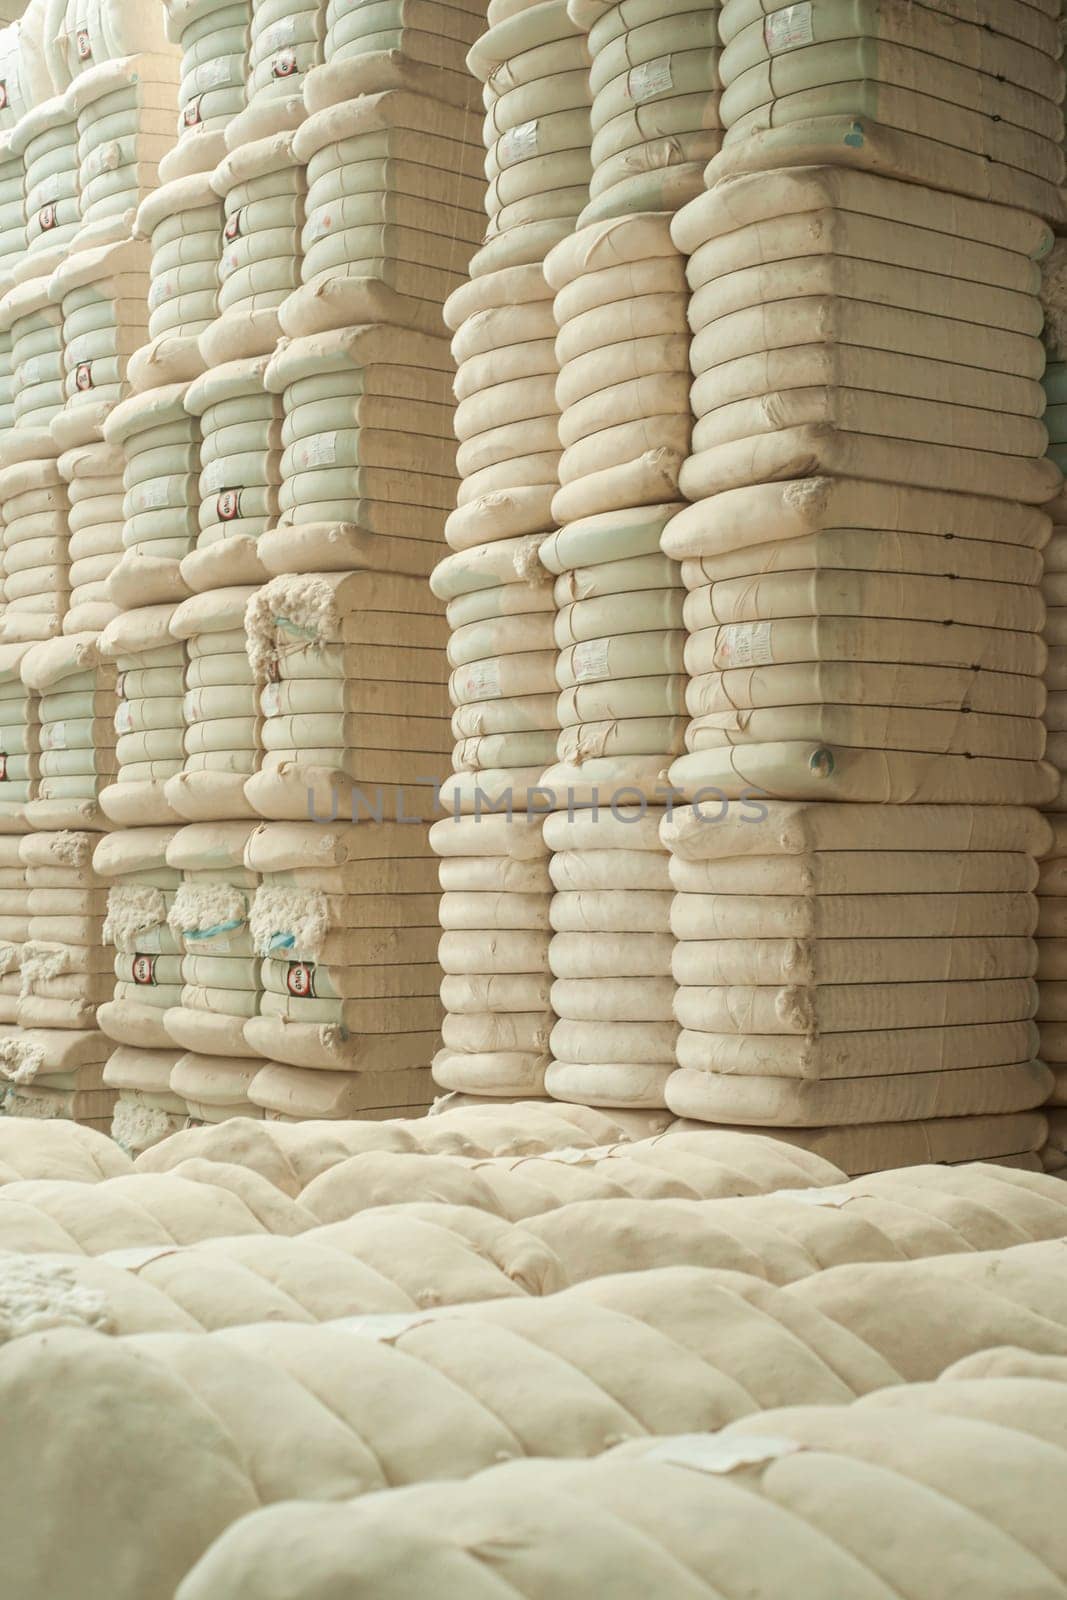 Store cotton bales. High quality photo